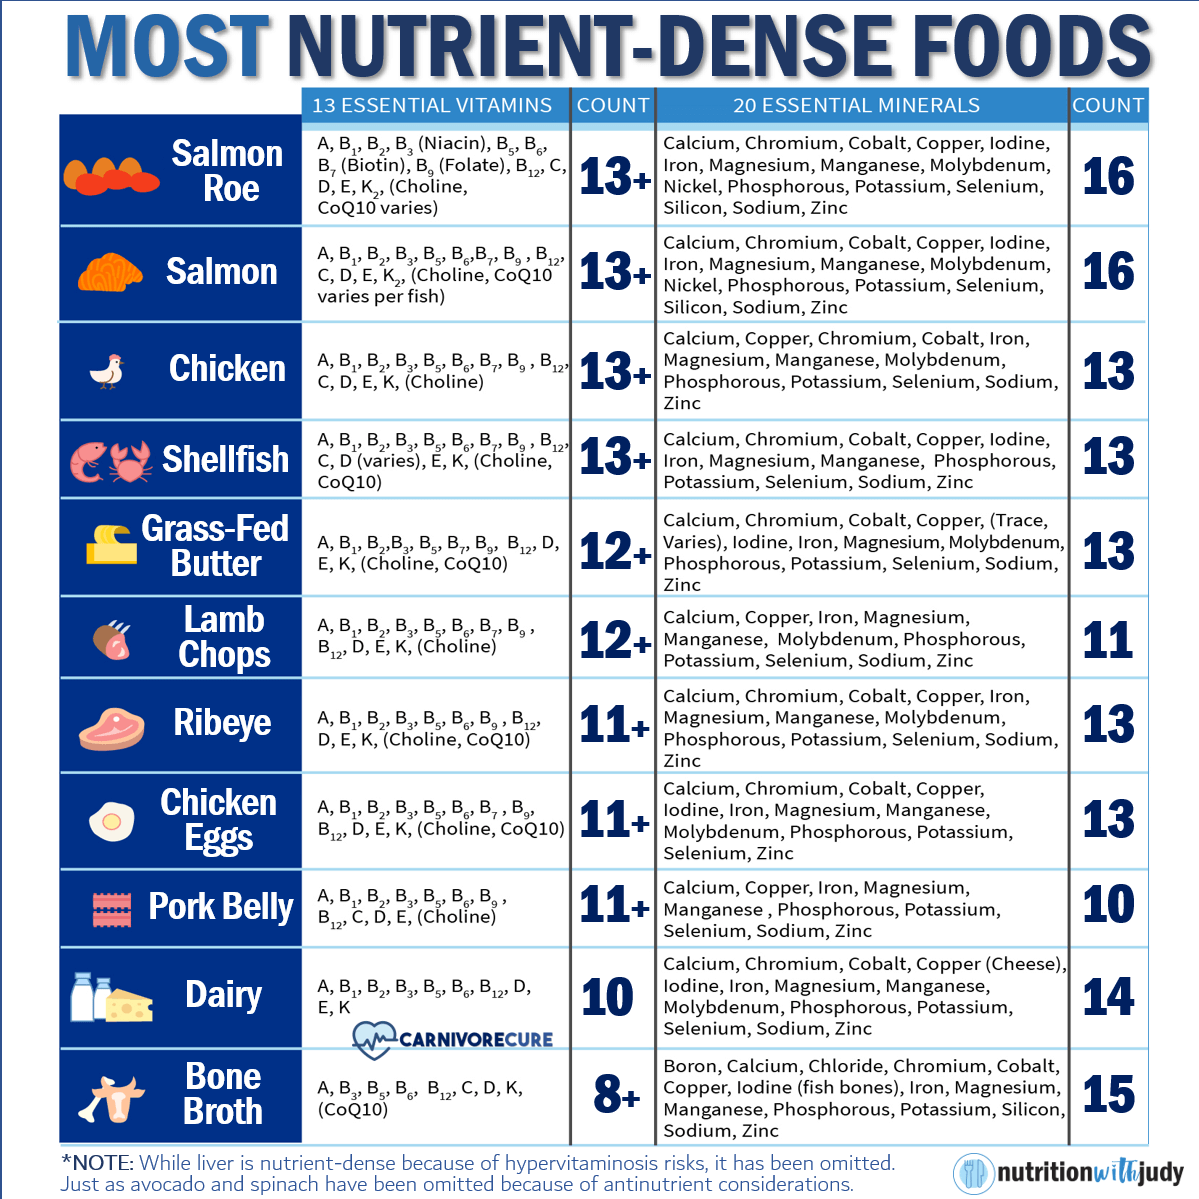 List of Most Nutrient-Dense Foods